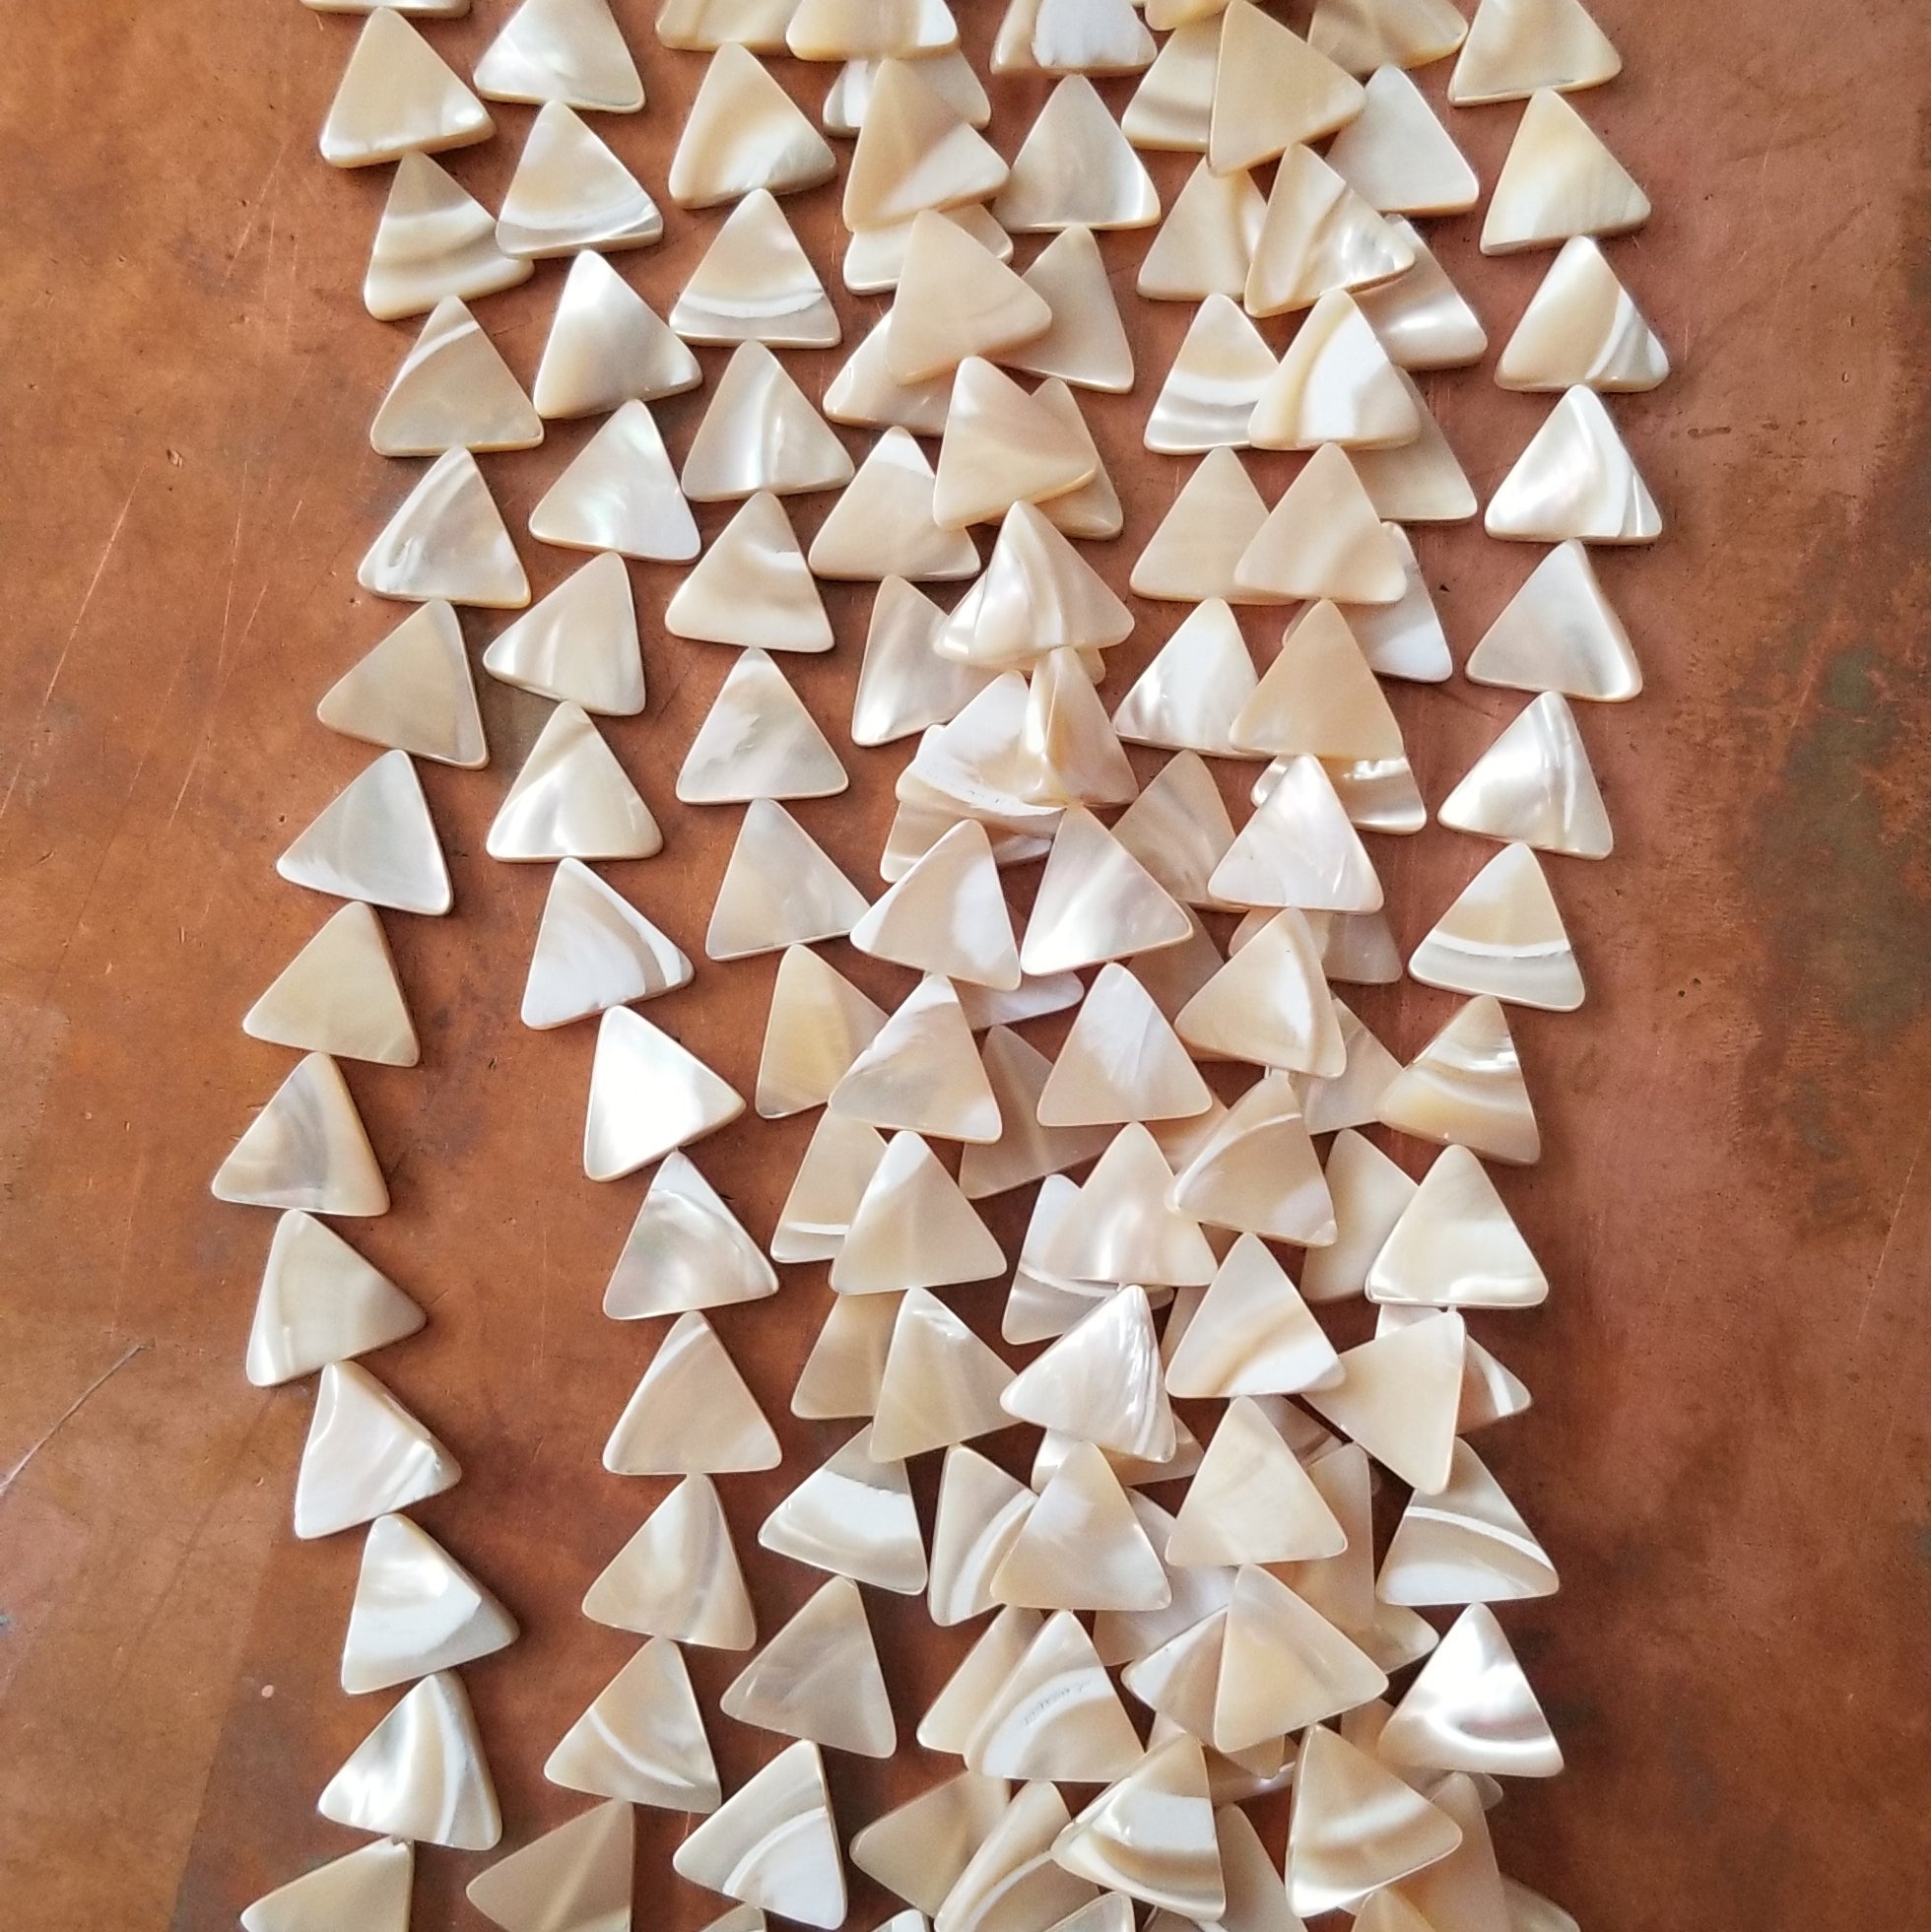 12mm Mother of Pearl Triangles - Natural Color